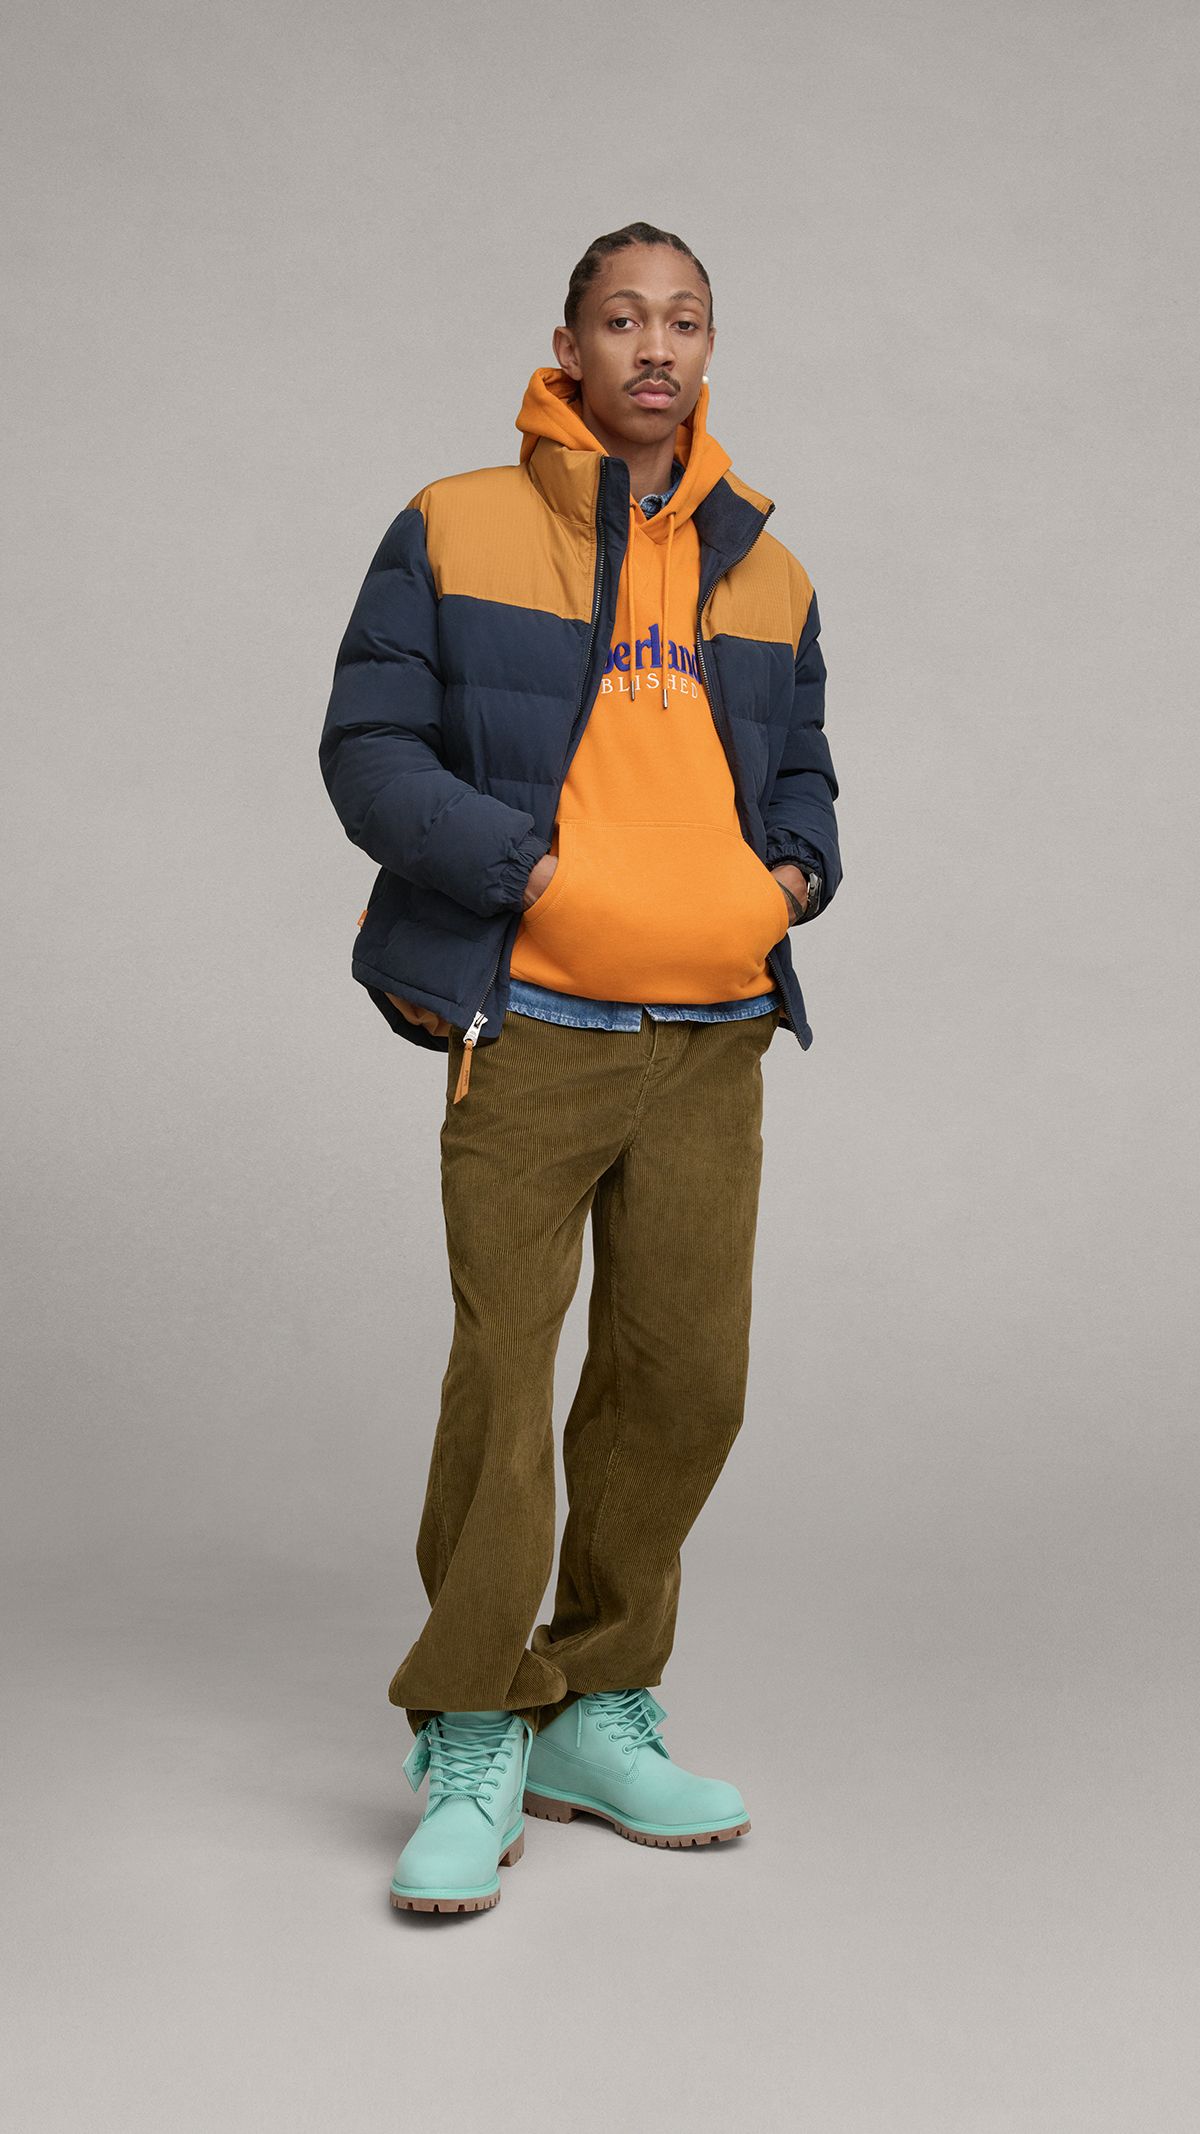 Man standing with Timberland orange and navy blue winter jacket over orange hooded sweatshirt, brown pants and Holiday light blue color way Timberland boots